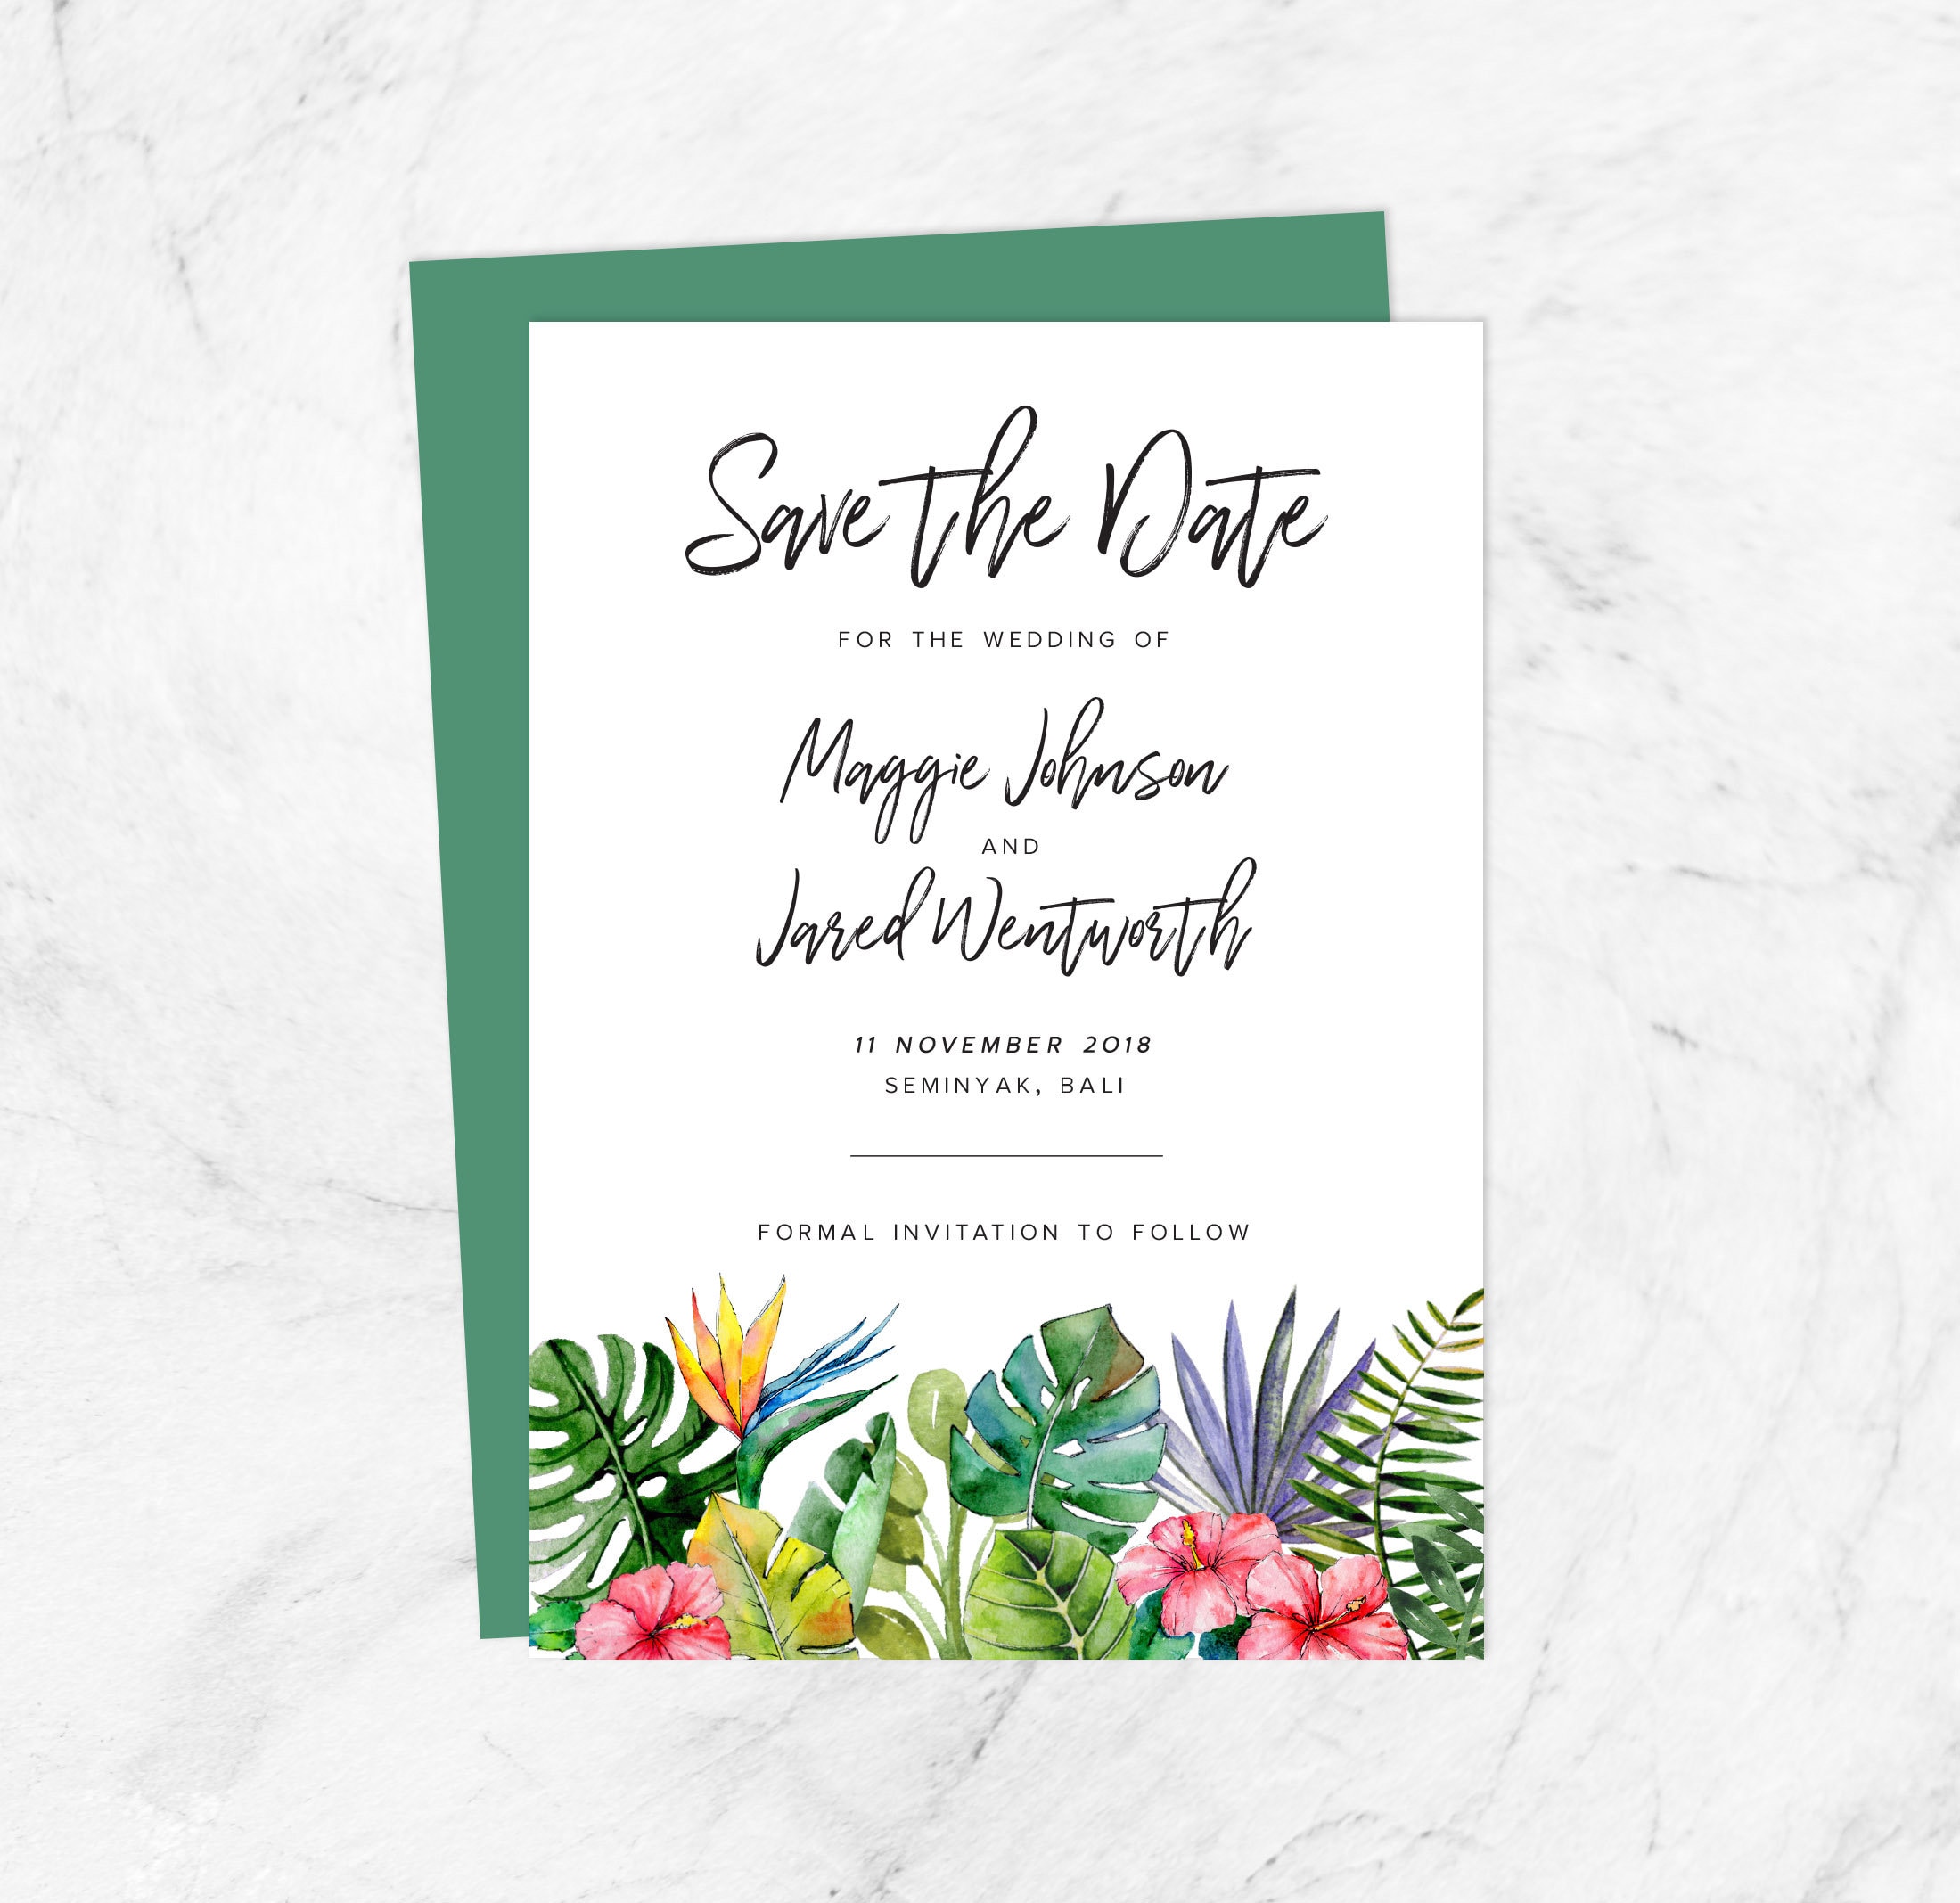 Printable Date Idea Cards - 94 Date Cards! – The Savvy Sparrow